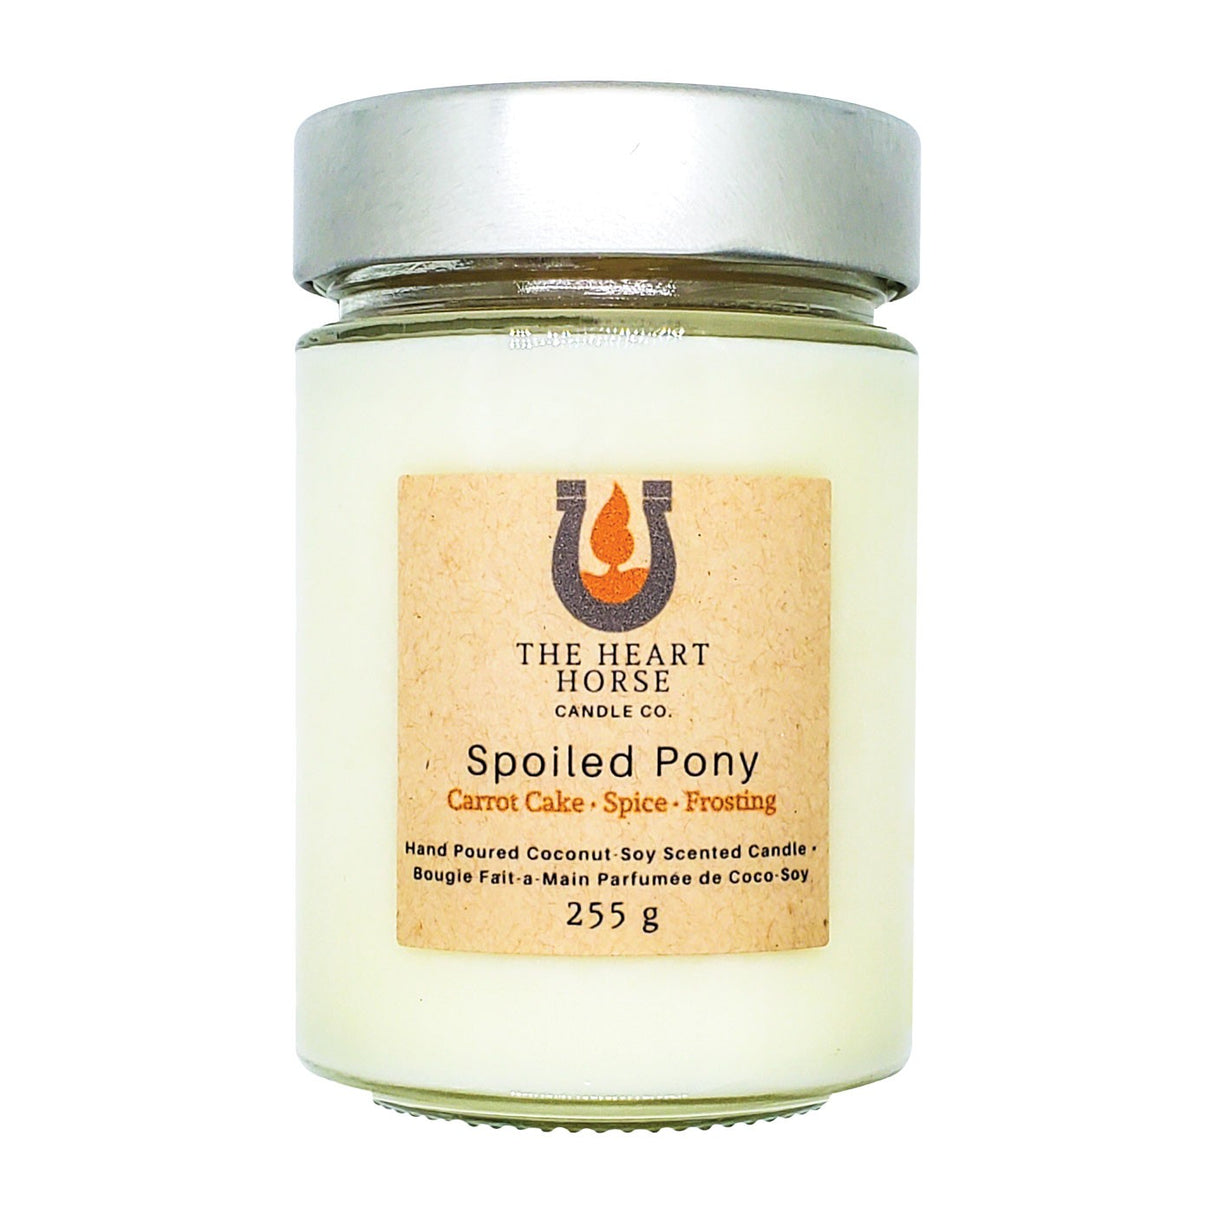 The Heart Horse Candle Co. Spoiled Pony Candle